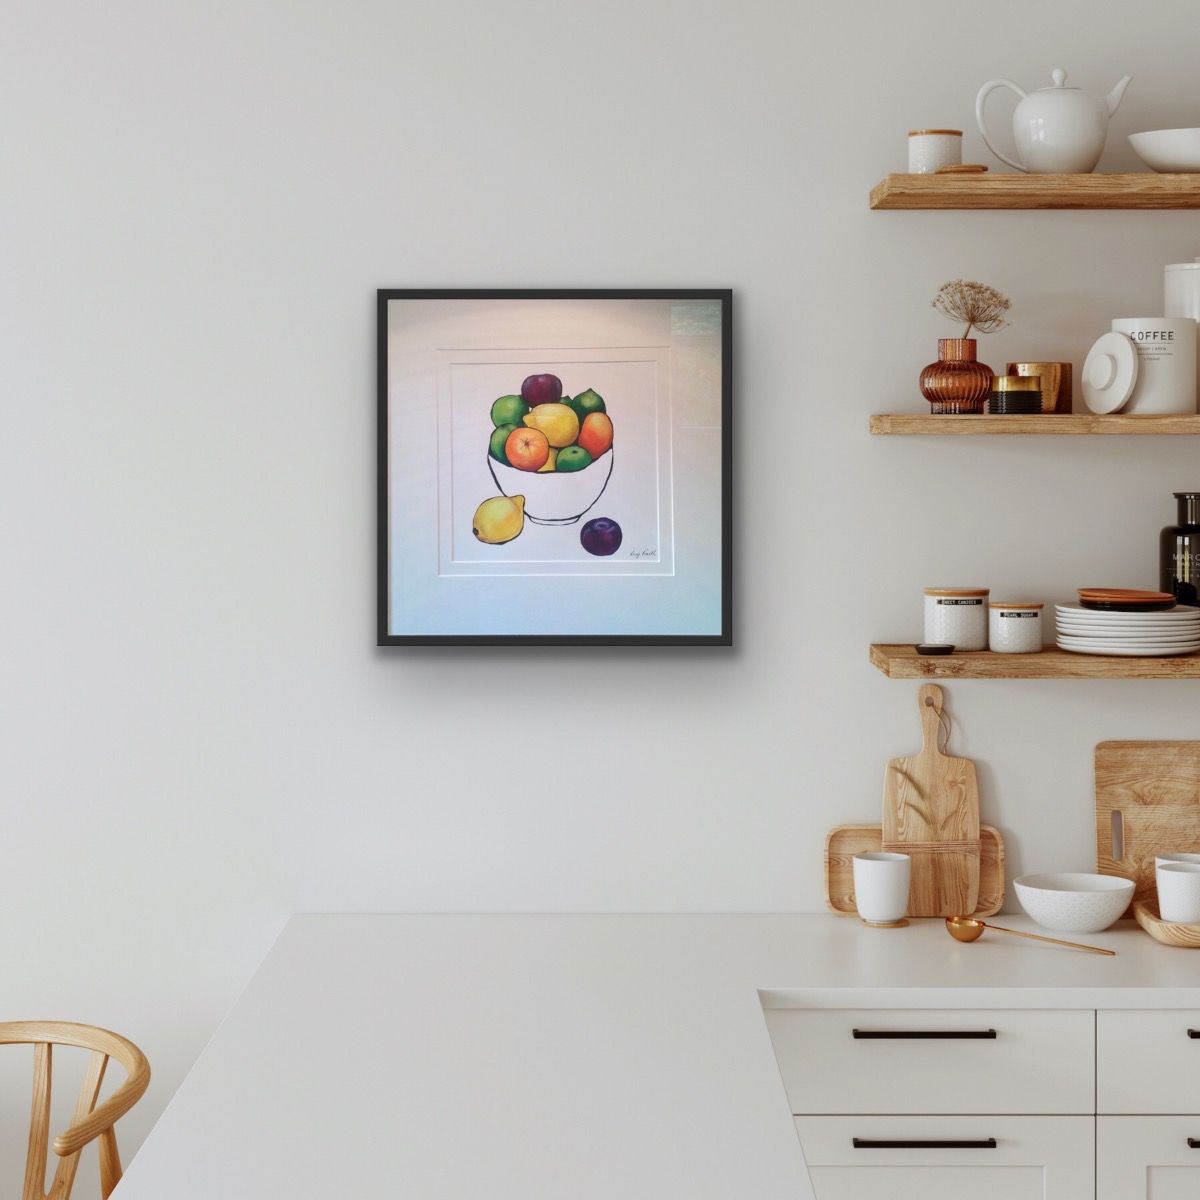 Citrus Bowl with plums by Lucy Routh - Secondary Image